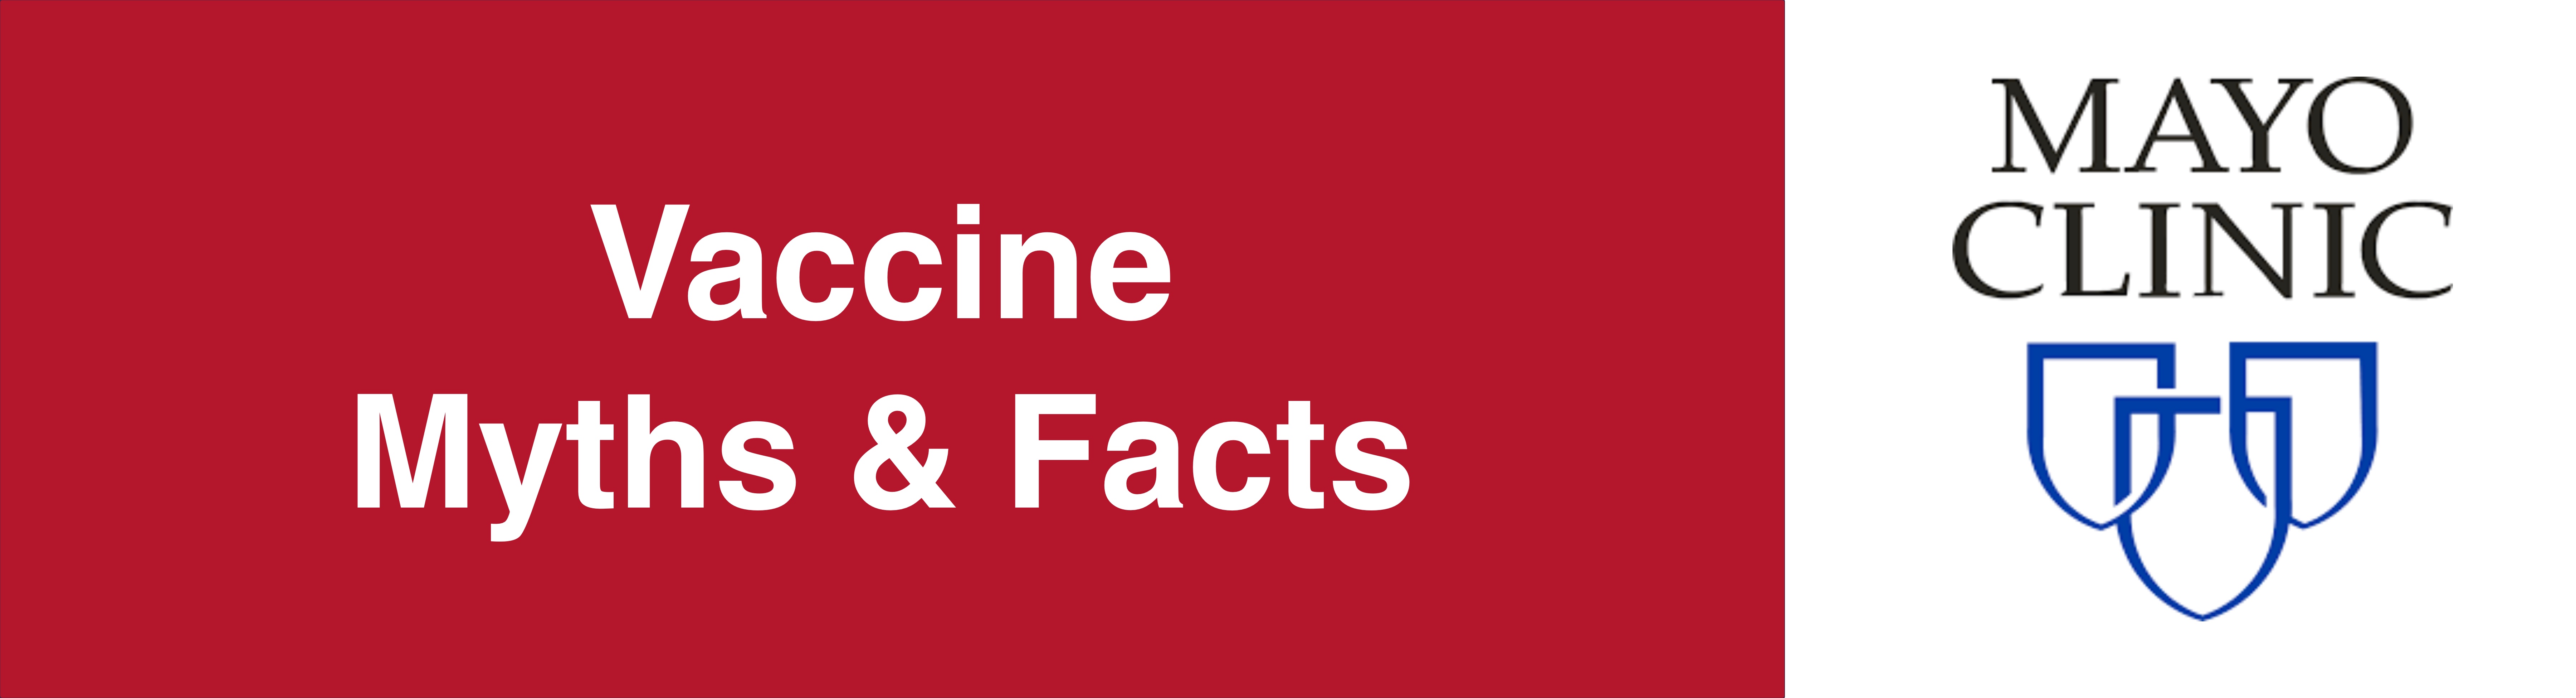 Mayo Clinic's Myths & Facts about Covid Vaccines